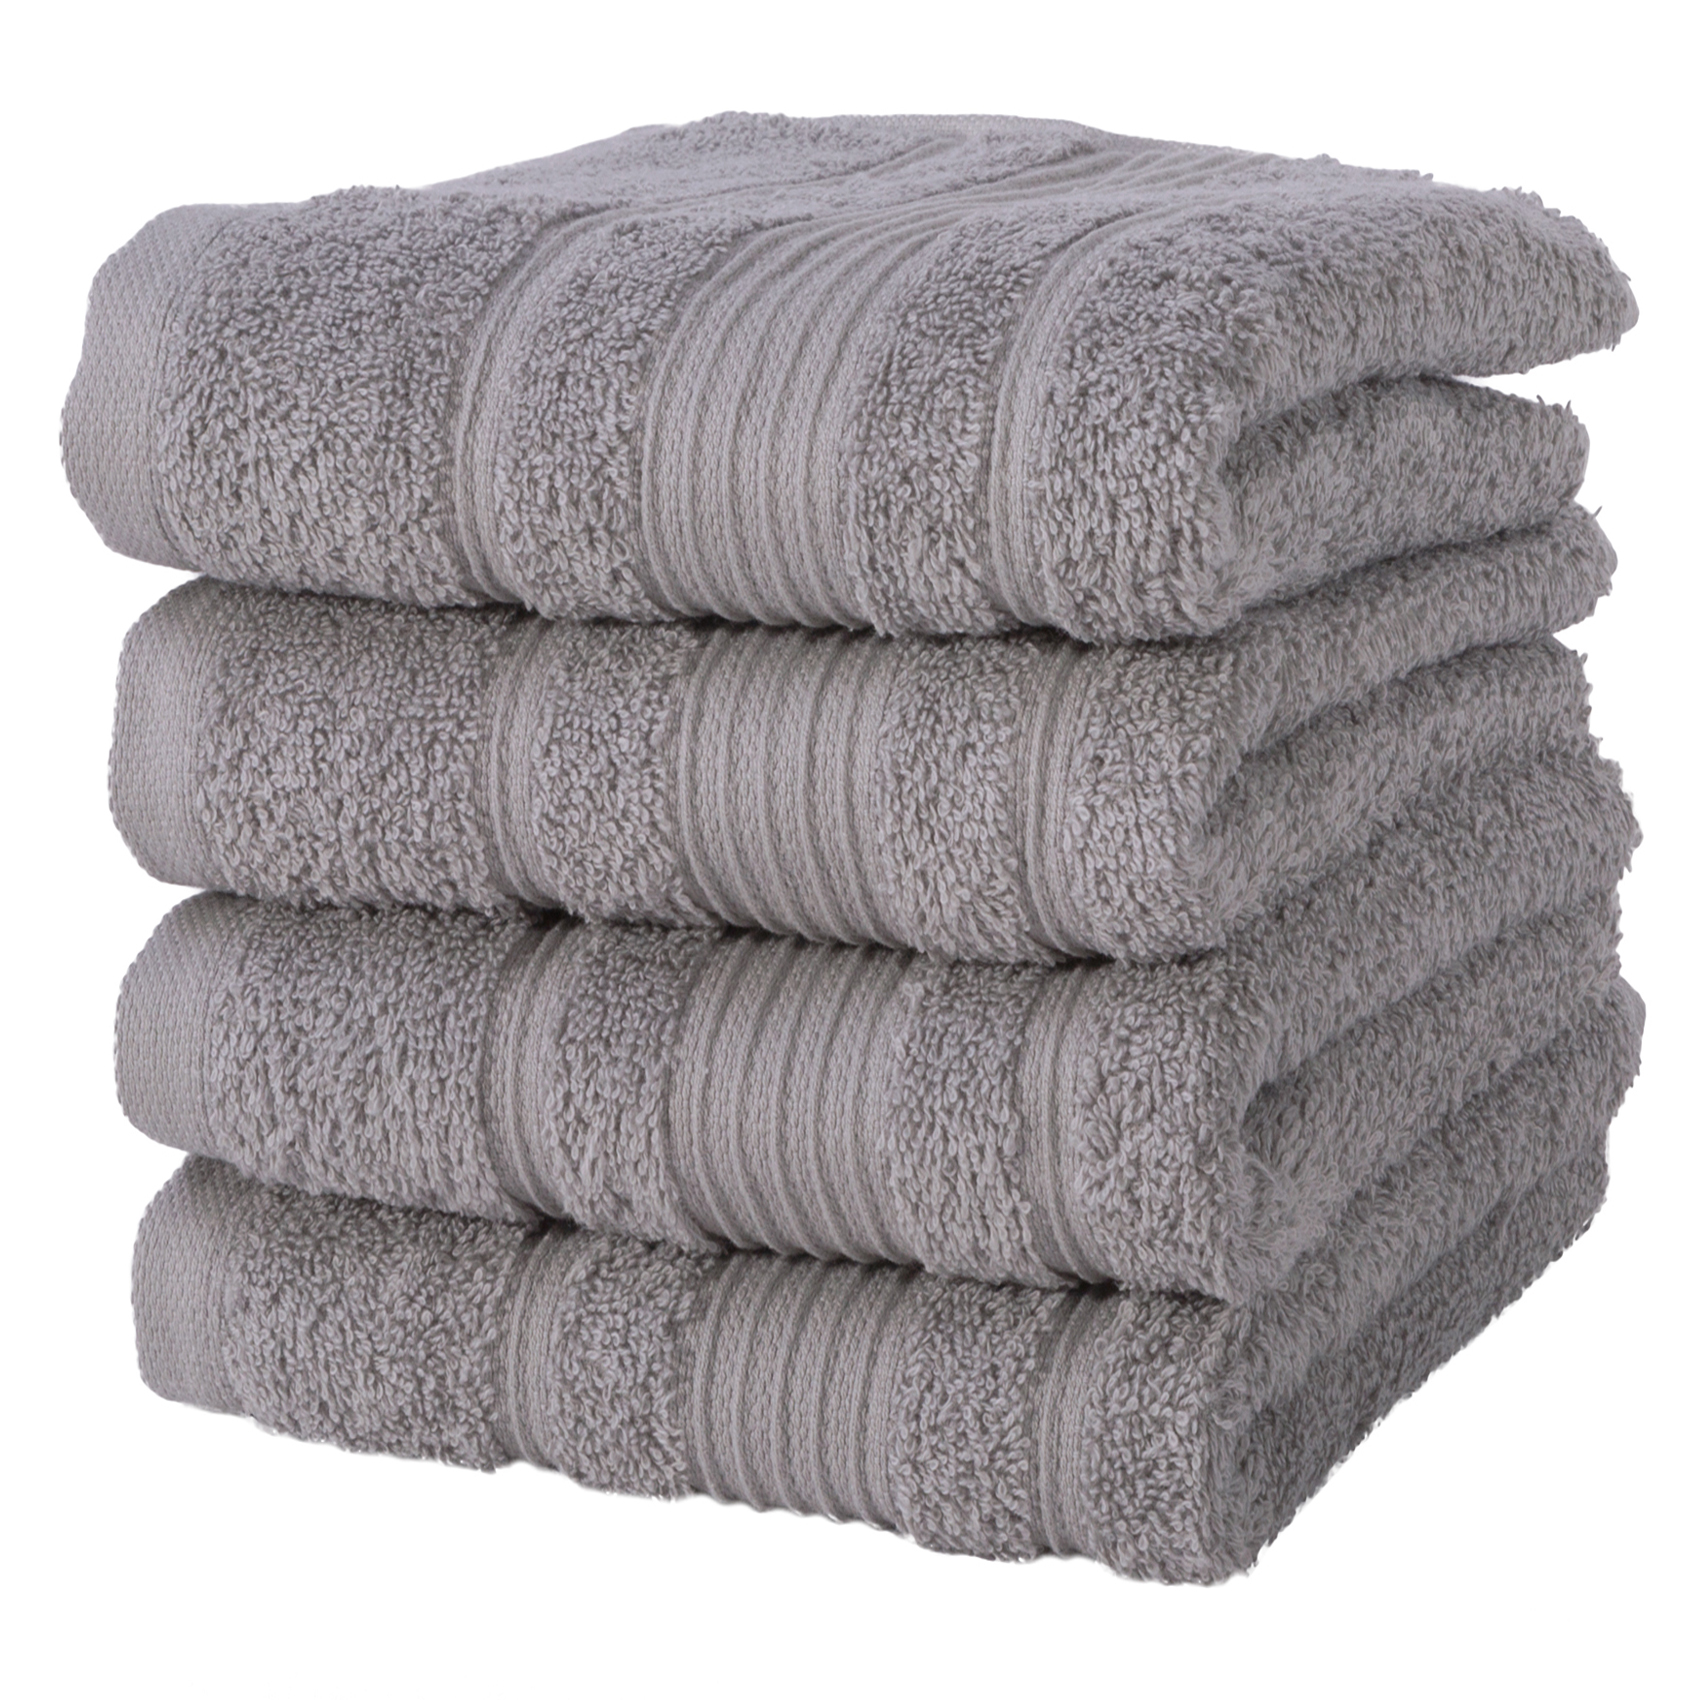 Authentic Hotel and Spa Turkish Cotton Bath Towels (Set of 4) - Bed Bath &  Beyond - 4717997